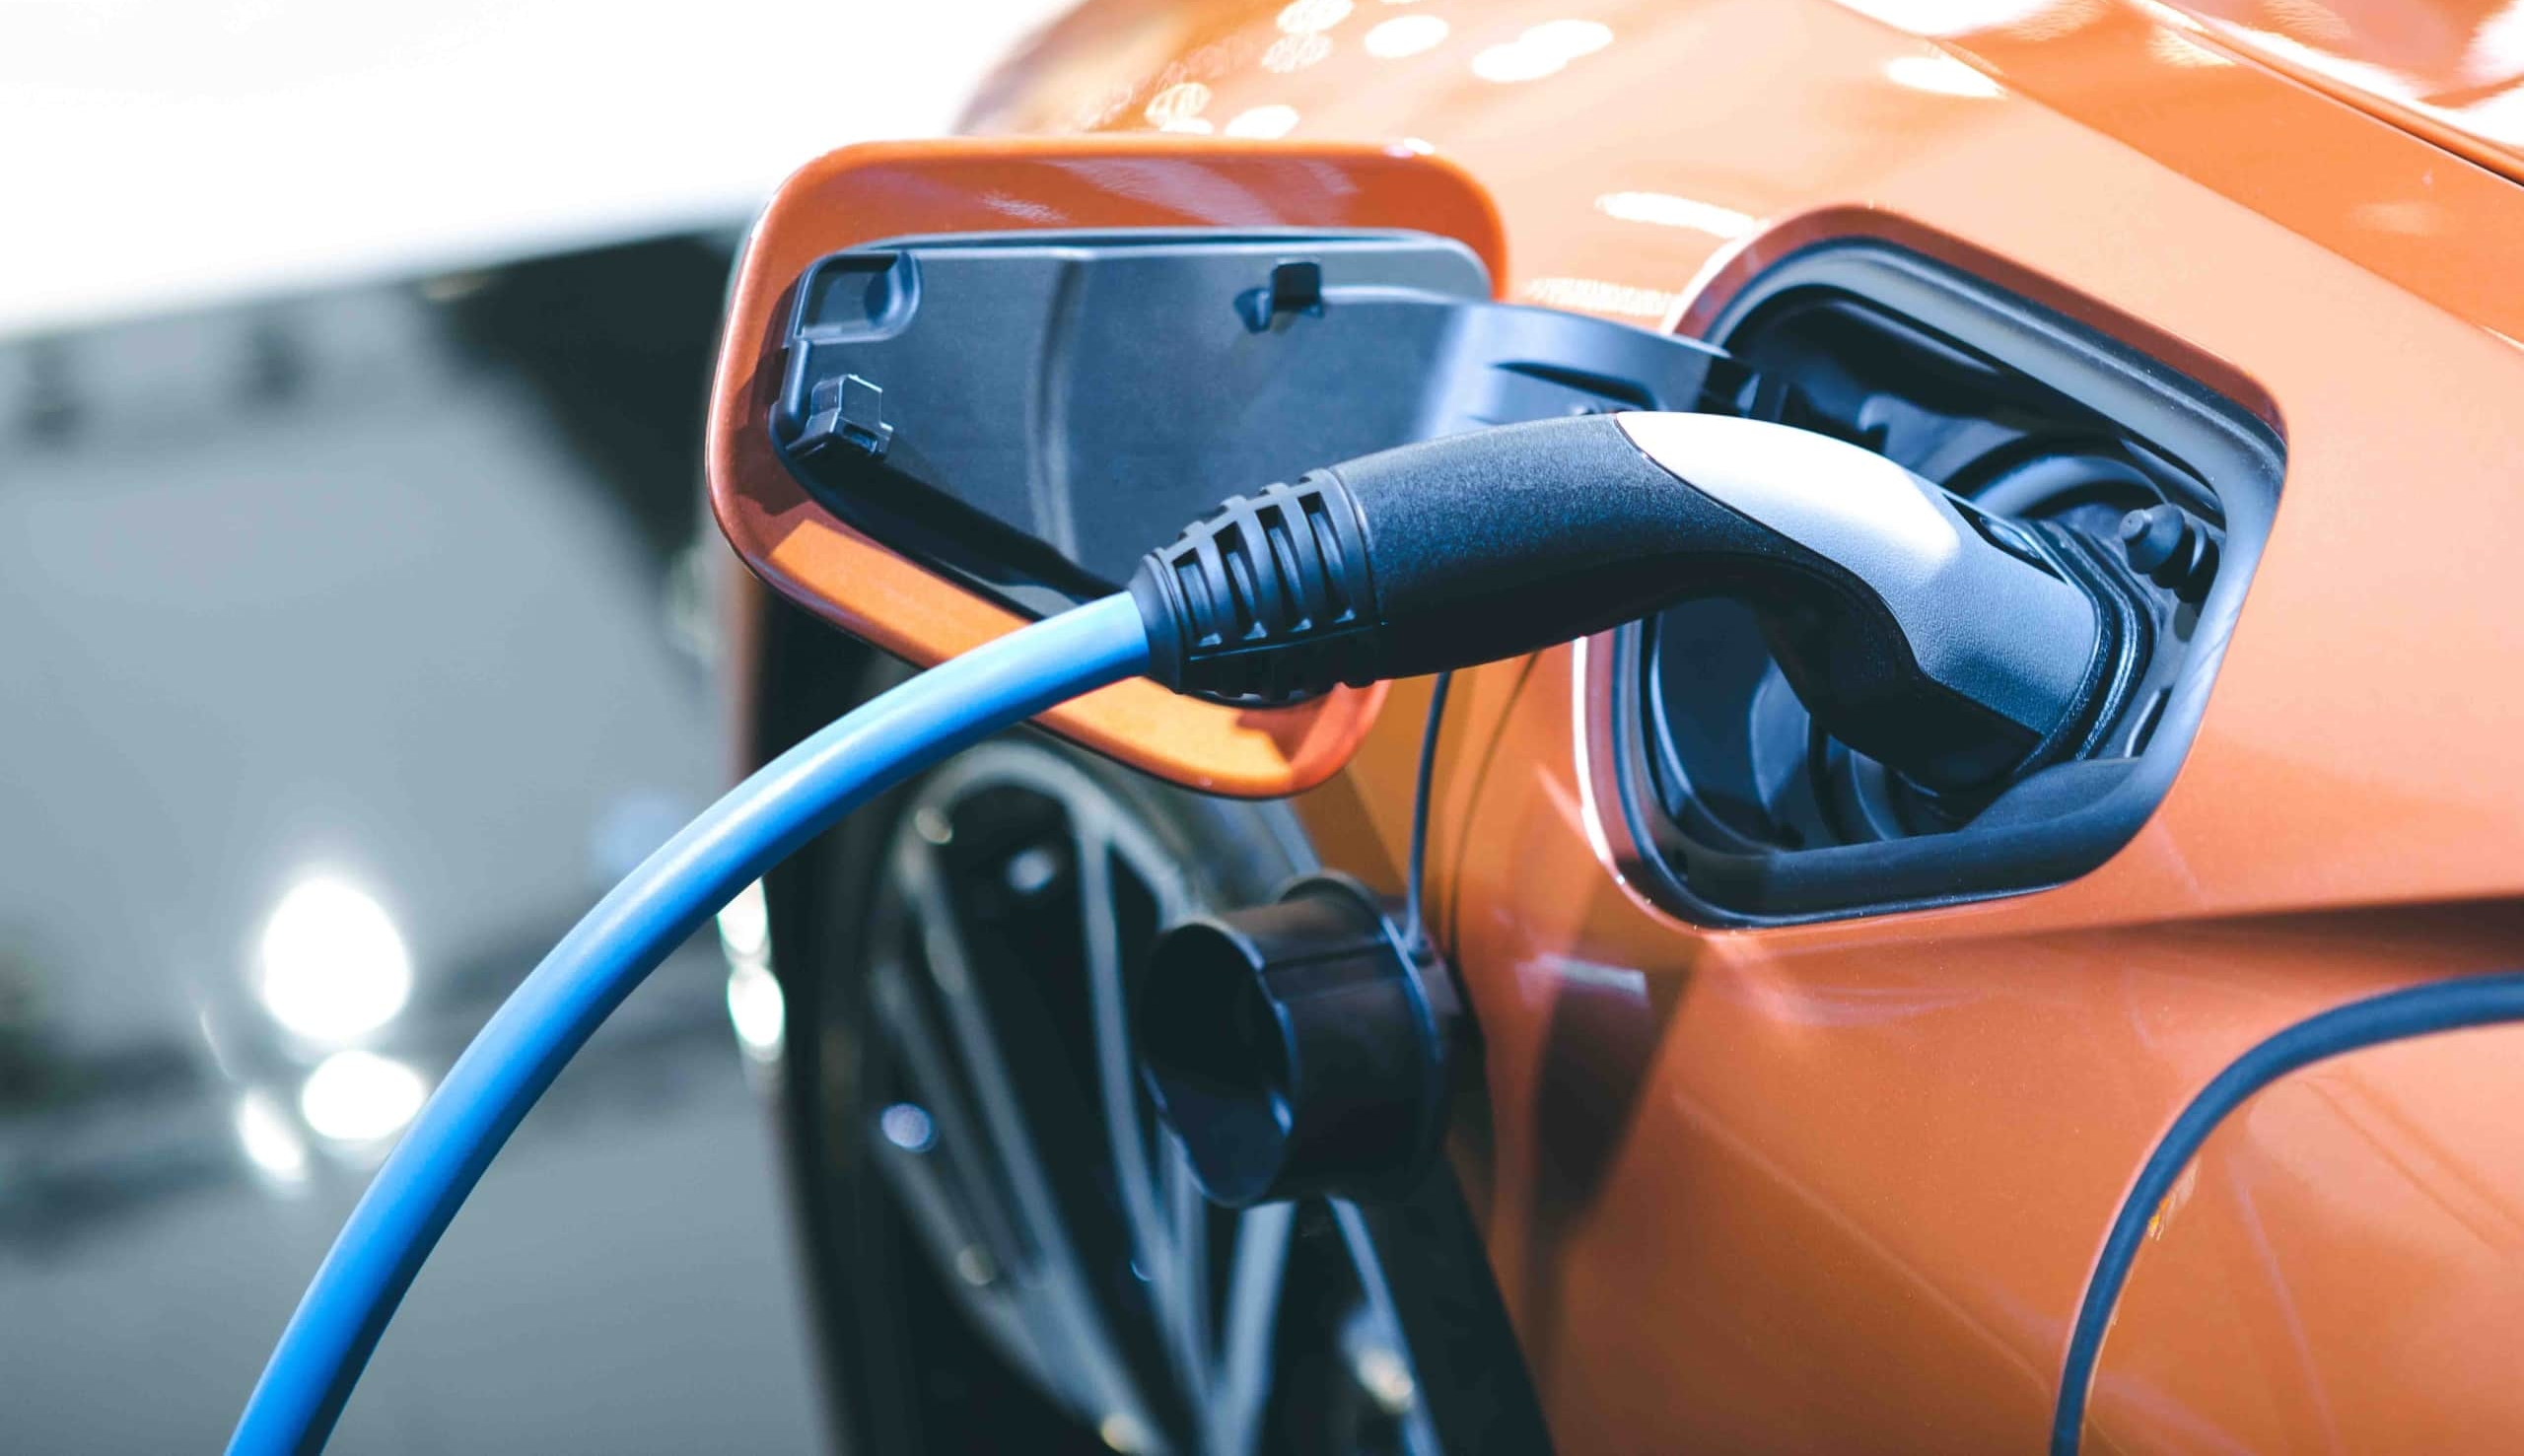 Facilitate charging stations to EV drivers